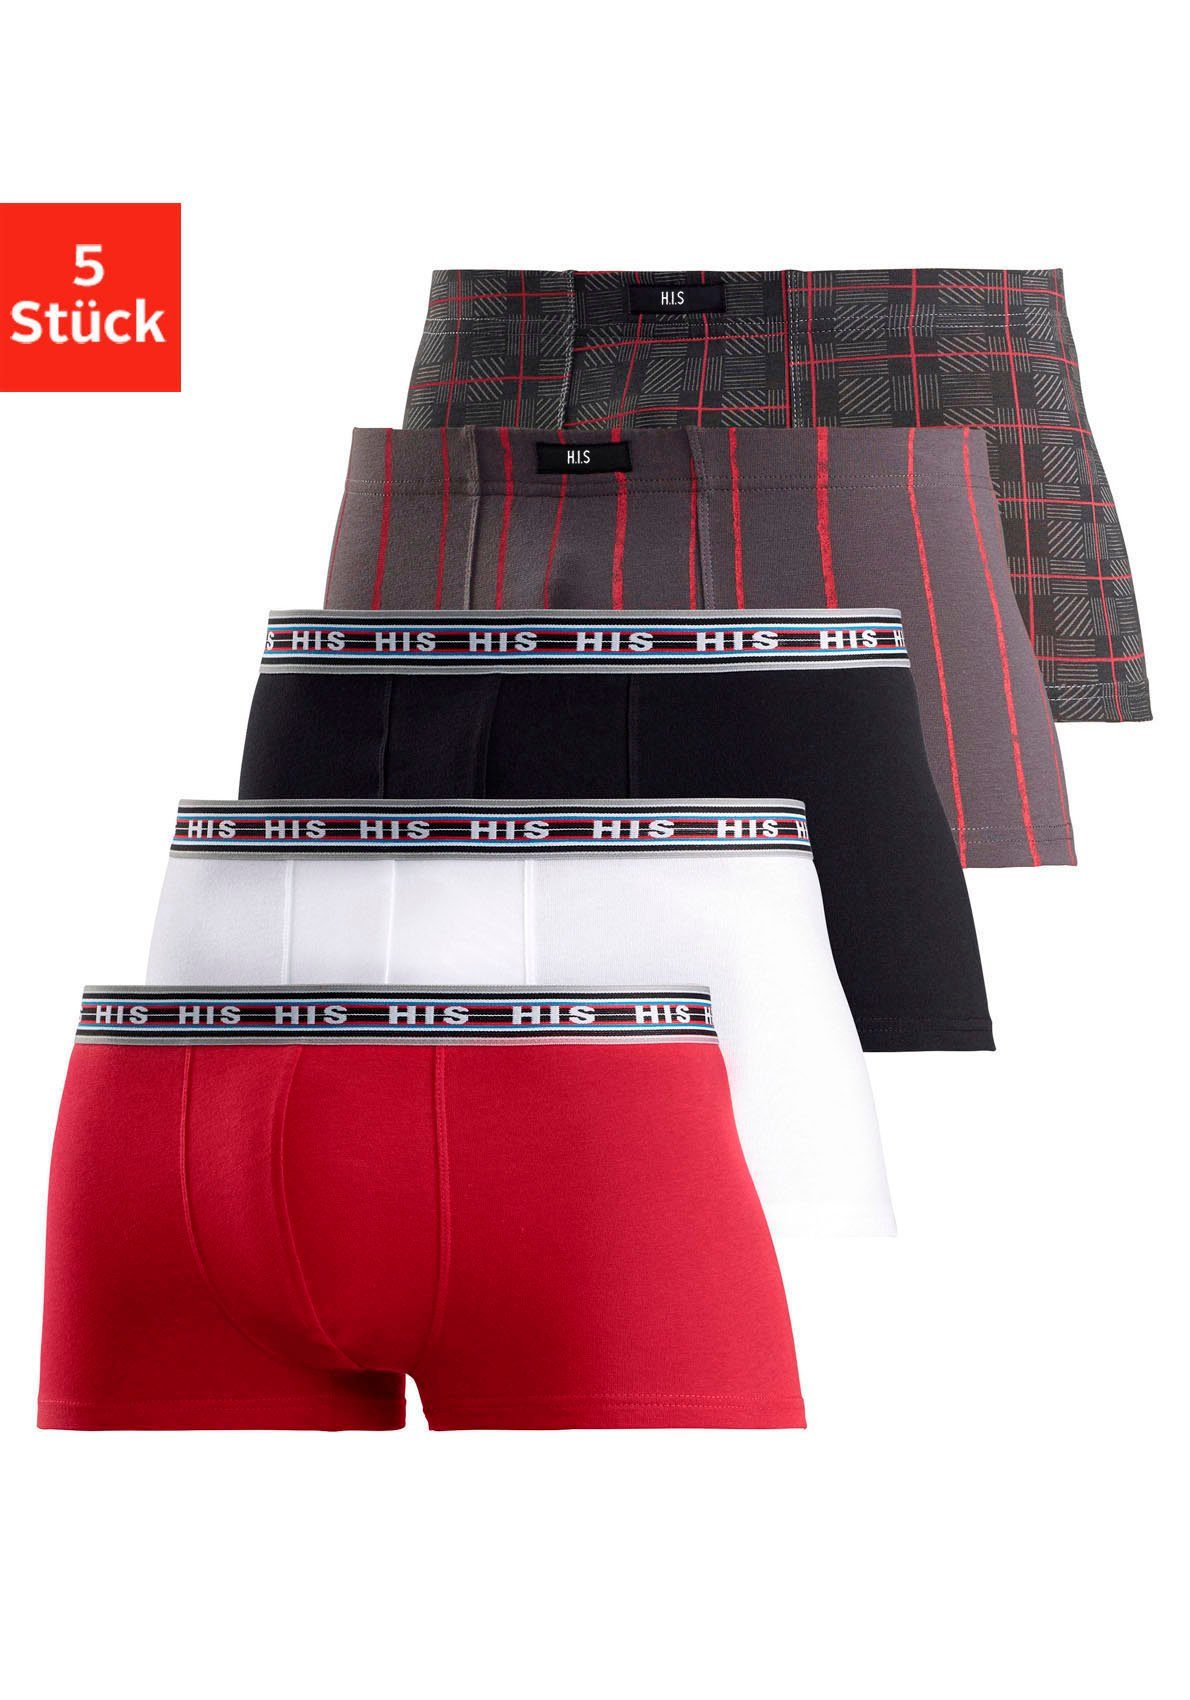 H.I.S Boxershorts (Packung, 5-St) in Hipster-Form aus Baumwoll-Stretch